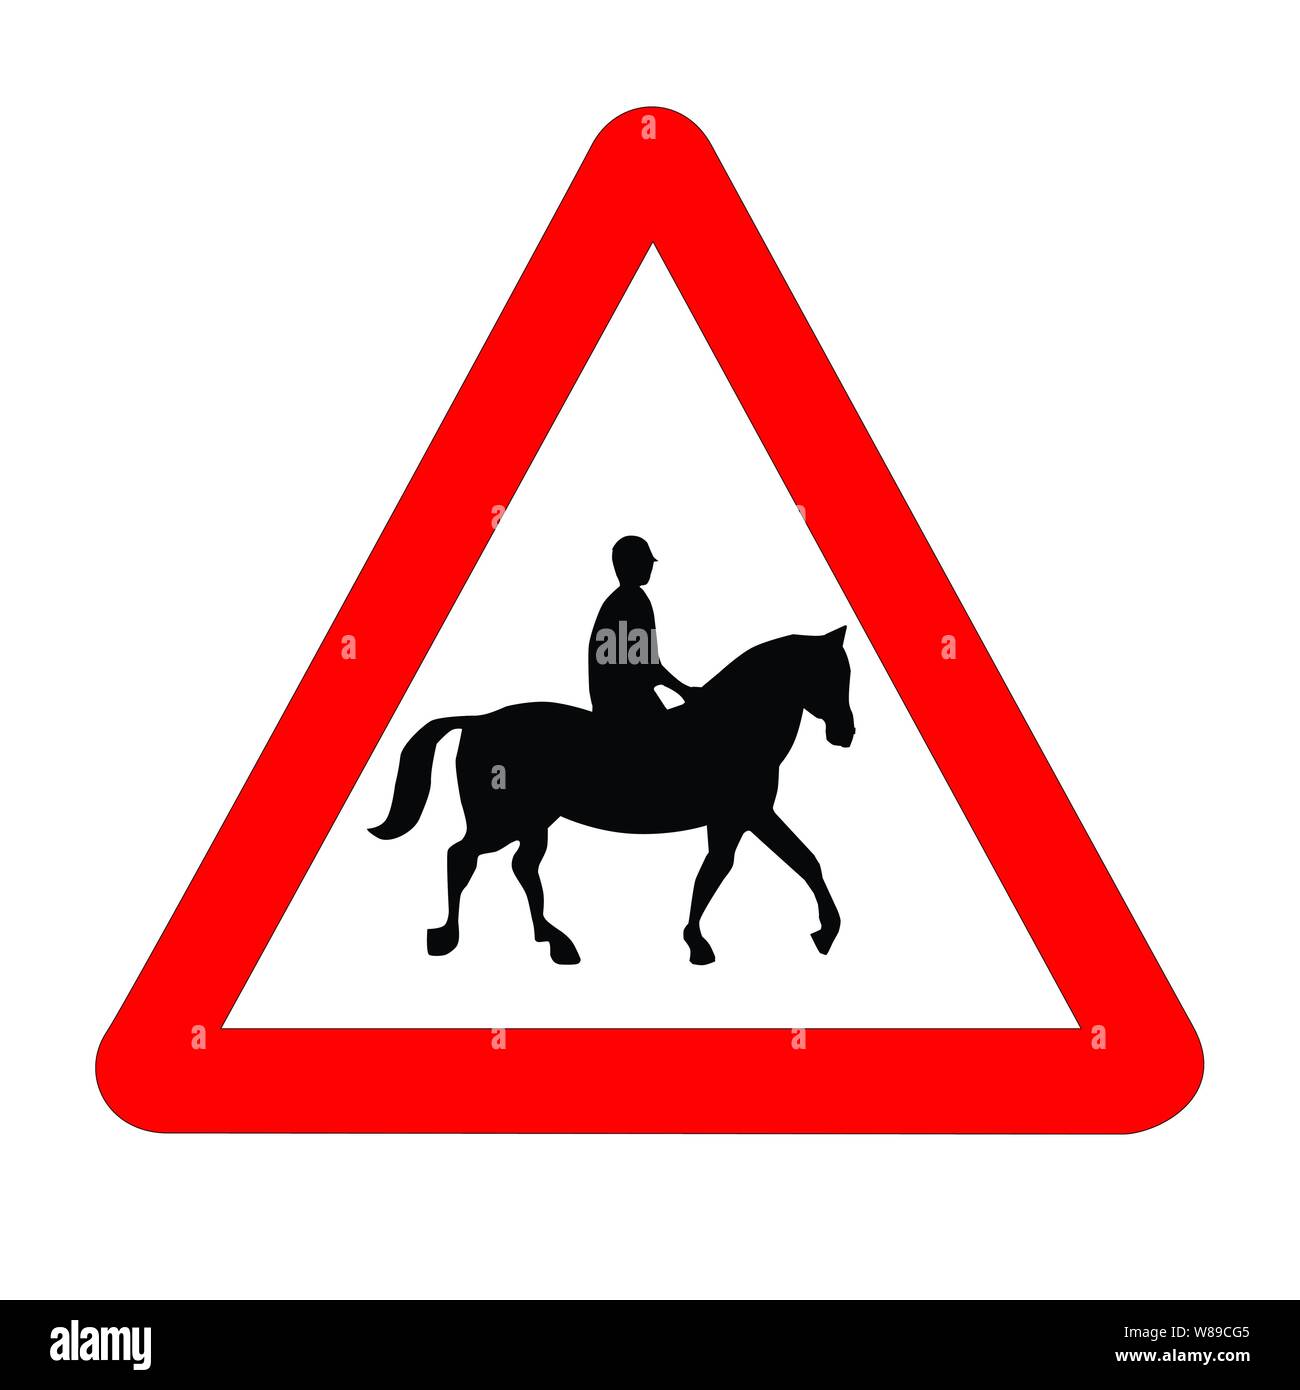 The traditional HORSE AND RIDER triangle, traffic sign isolated on a white background.. Stock Vector